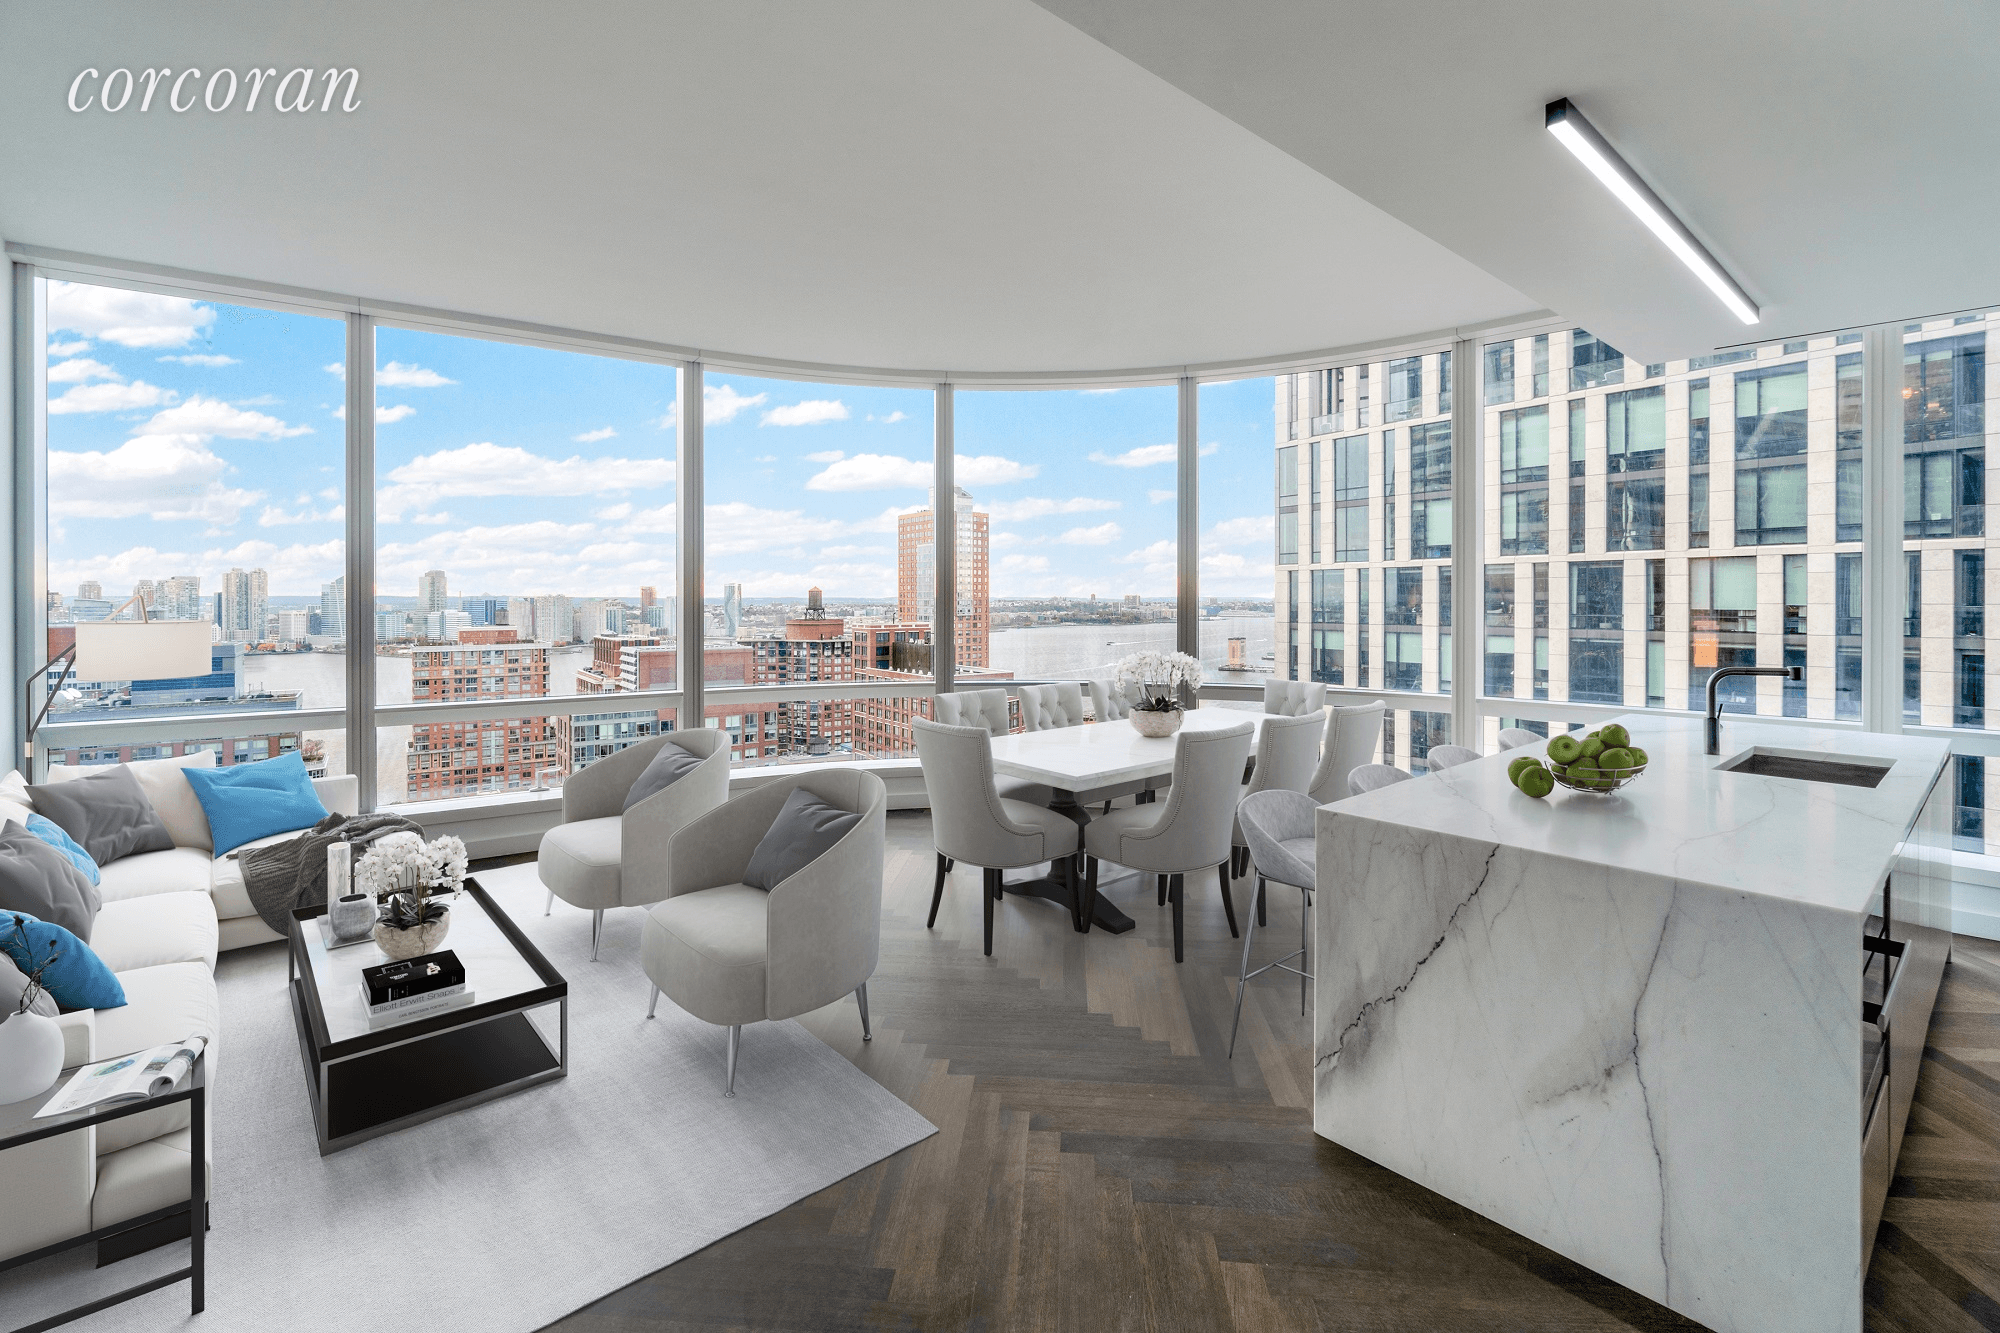 Perfectly situated on the 29th Floor of 111 Murray, the highly anticipated new condominium expertly conceived by world renowned architects Kohn Pedersen Fox Associates and AD Top 100 designer David ...